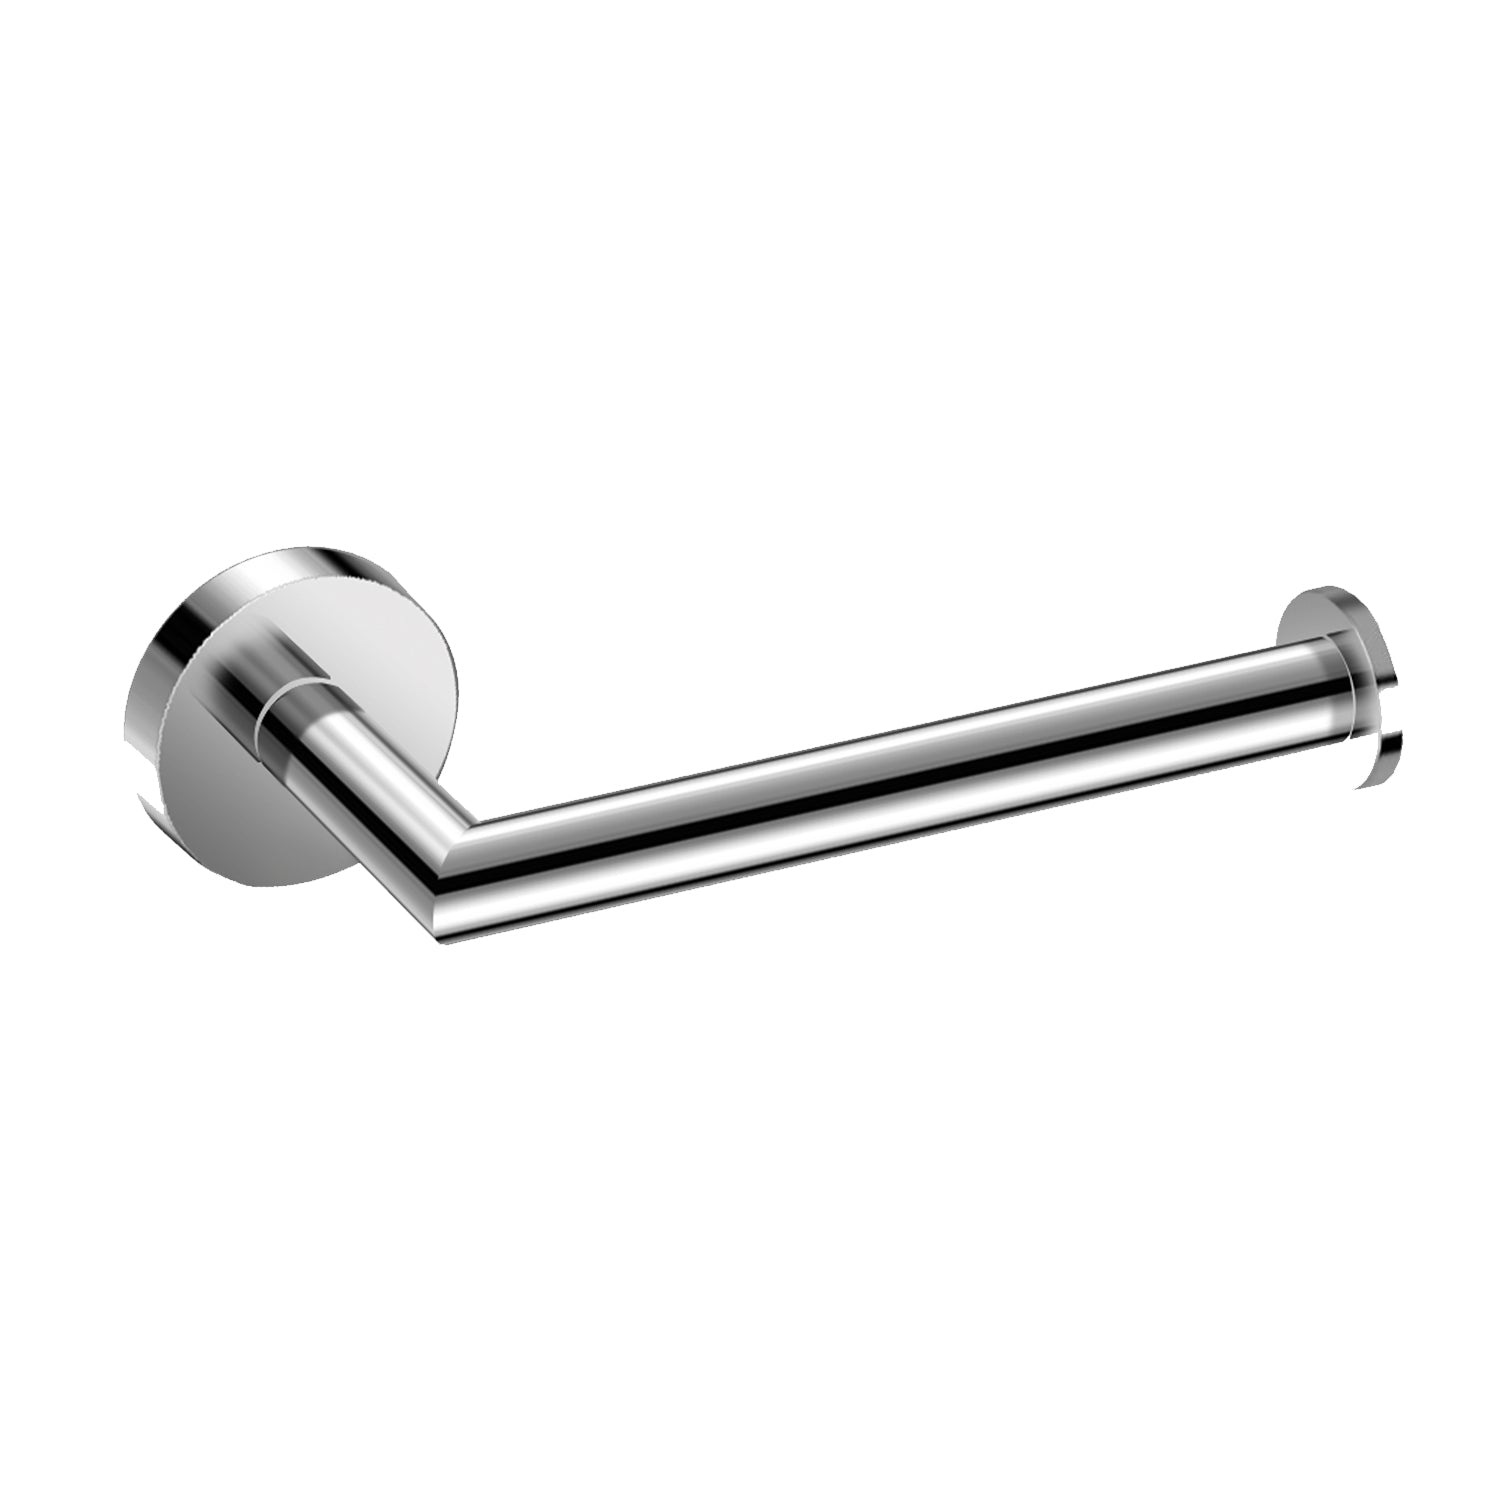 DAX Valencia Toilet Paper Holder, Right Opening, Round Line, Wall Mount, Brass Body, Brushed Nickel Finish, 6-11/16 x 3-1/4 x 2 Inches (DAX-GDC120156-BN)